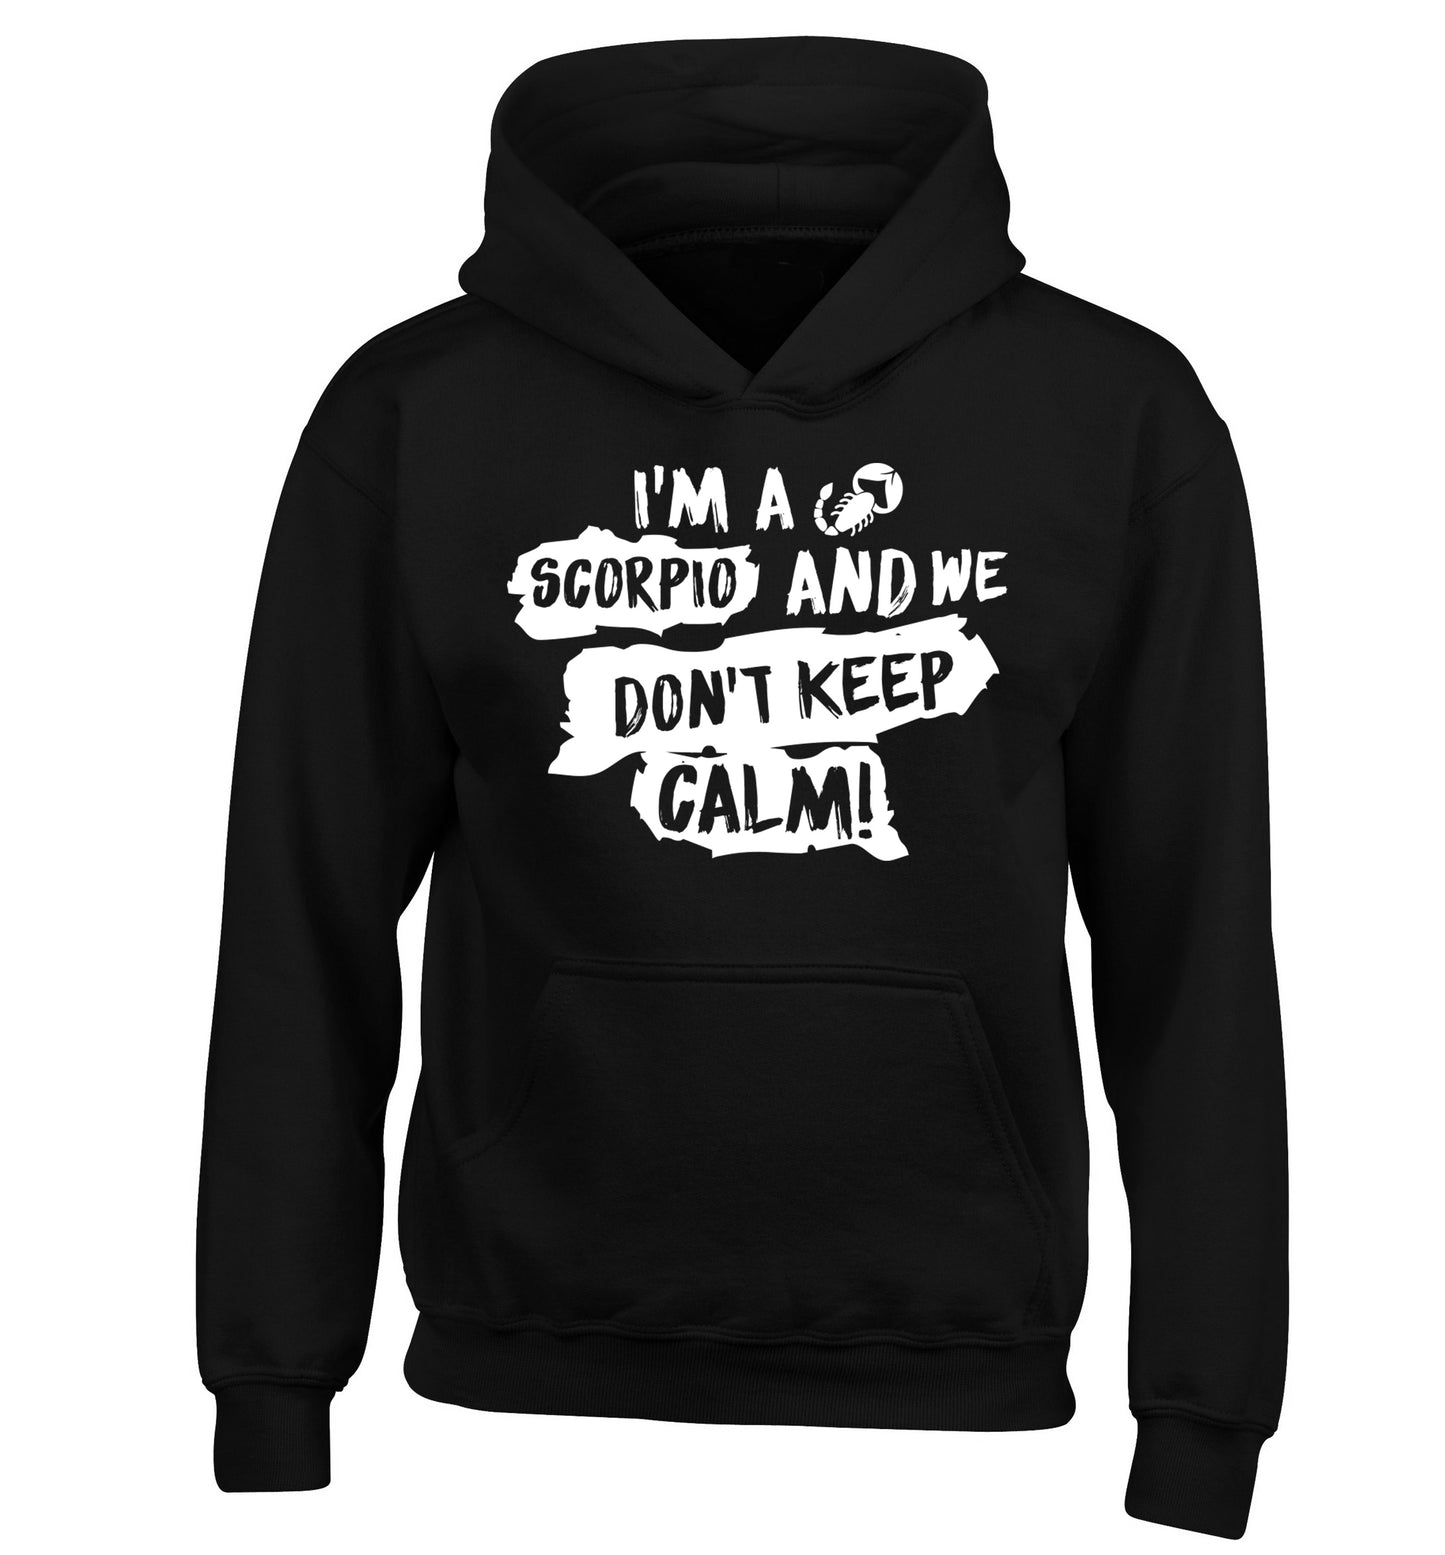 I'm a scorpio and we don't keep calm children's black hoodie 12-13 Years